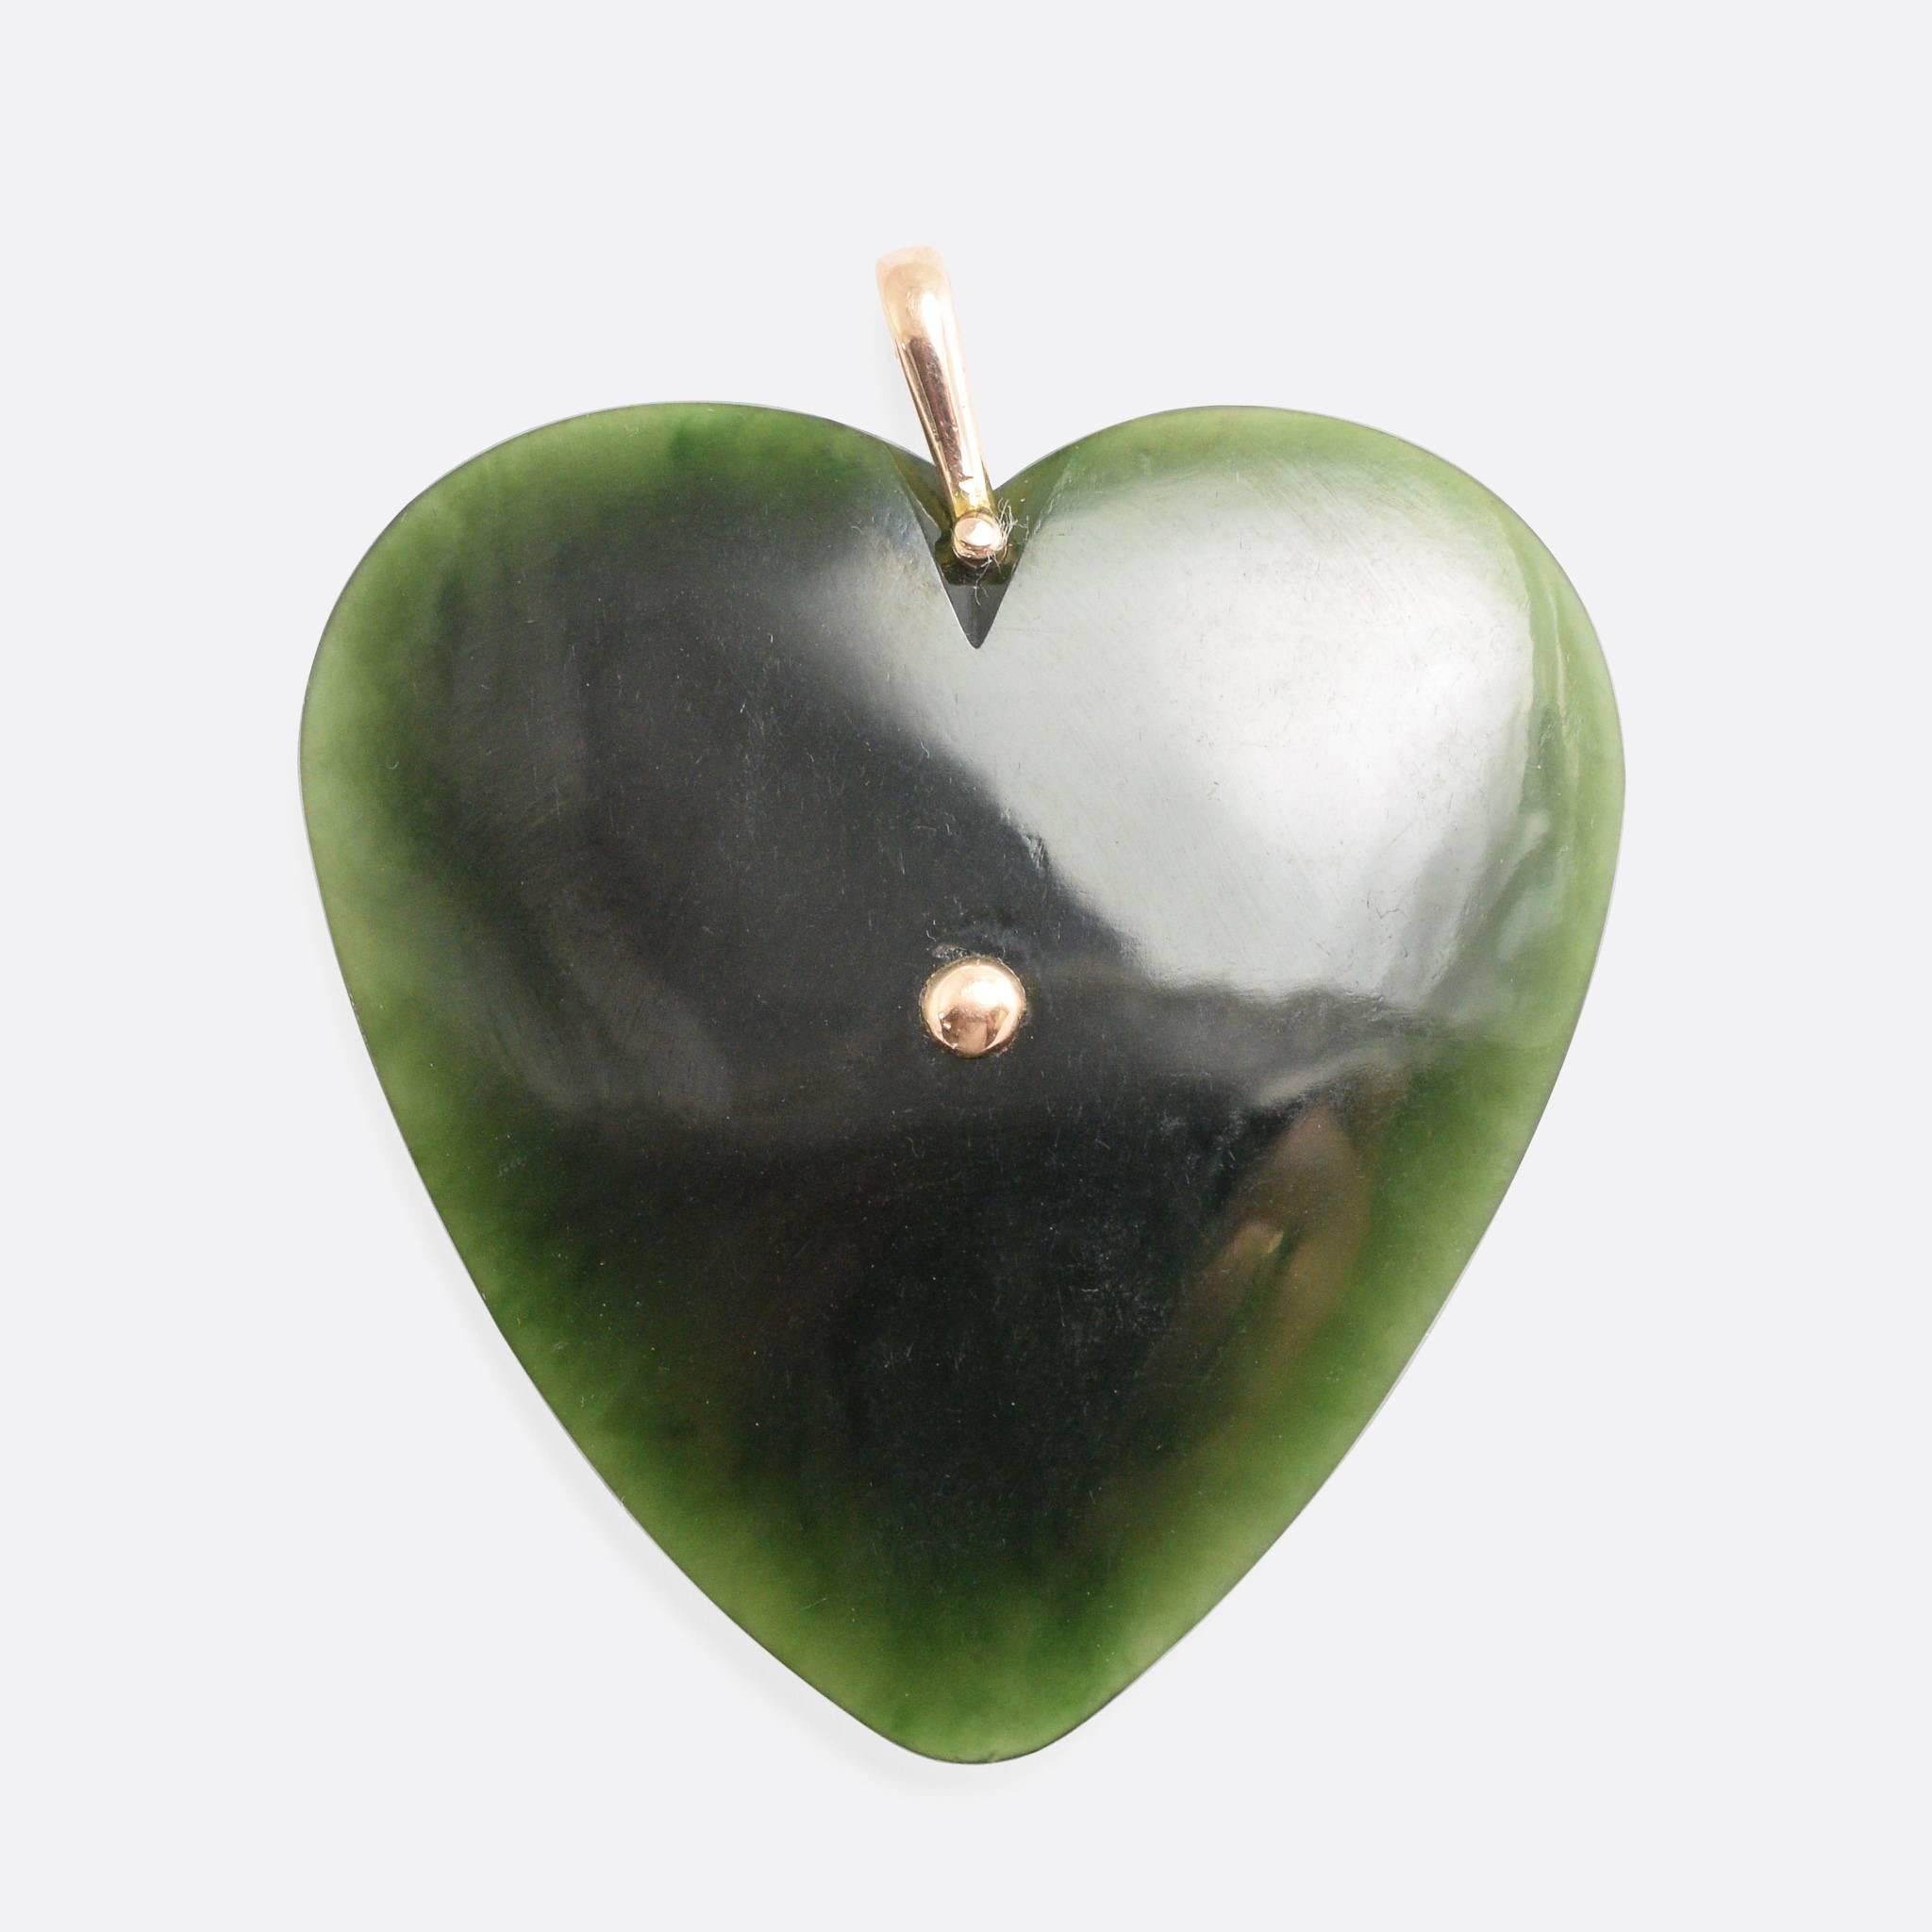 This cool oversized pendant is made from New Zealand greenstone (or nephrite). The stone has been carved into a heart shape, with an applied silver fern centrepiece (actually modelled in 9k gold). The silver fern (Cyathea dealbata) motif is